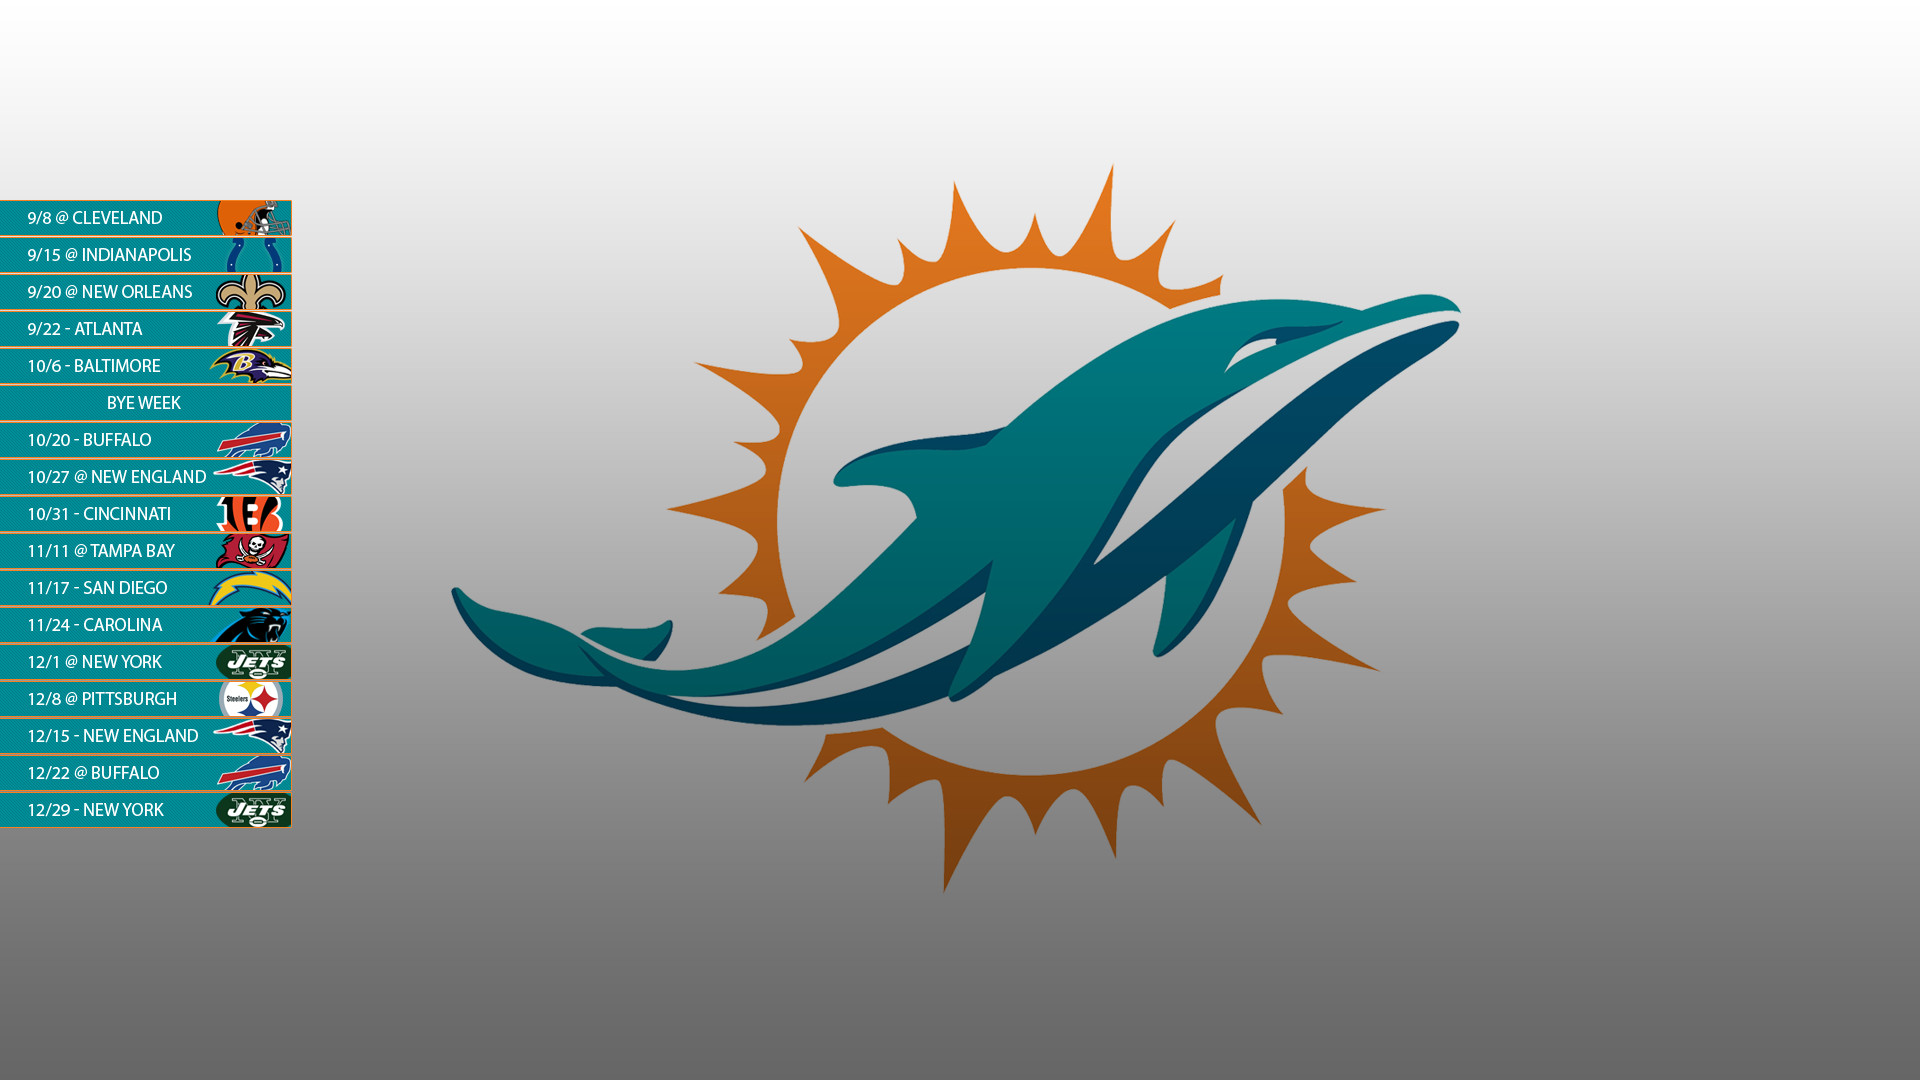 Miami Dolphins NFL Logo In Seagreen Background HD Miami Dolphins Wallpapers   HD Wallpapers  ID 85358